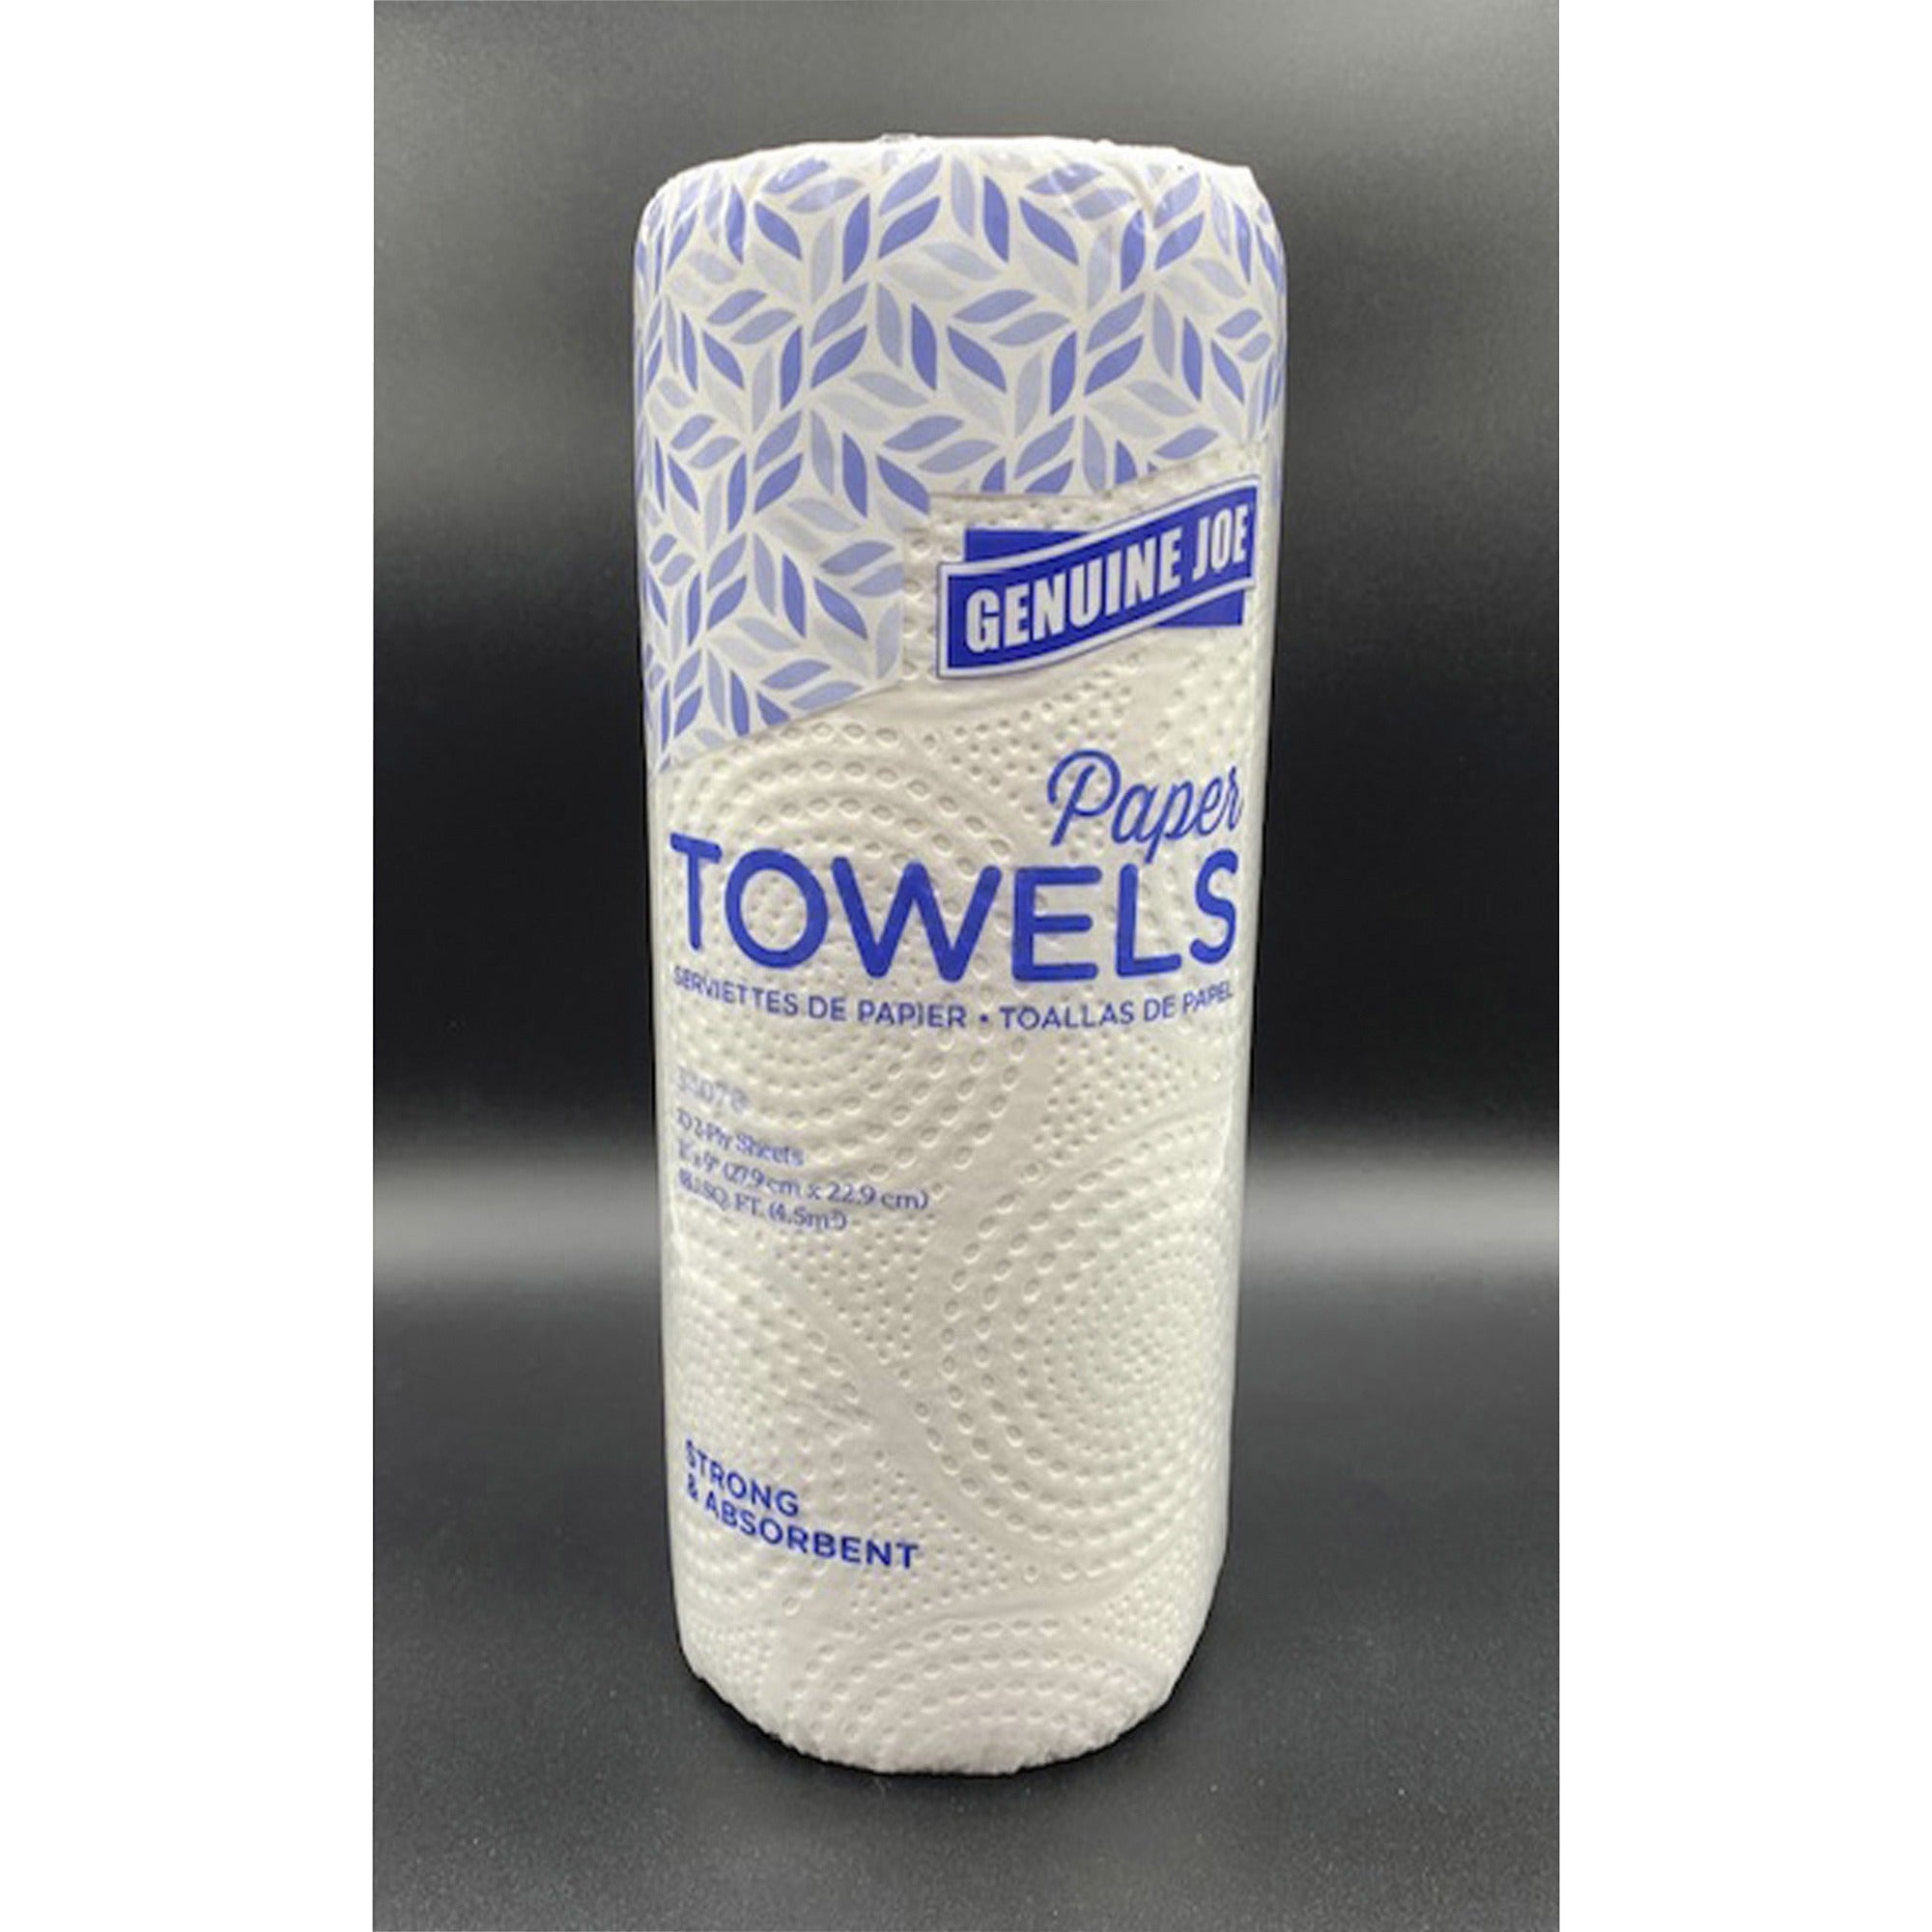 genuine-joe-2-ply-paper-towel-rolls-2-ply-9-x-11-70-sheets-roll-white-paper-absorbent-soft-perforated-tear-resistant-for-hand-food-service-kitchen-breakroom-15-carton_gjo34070 - 1